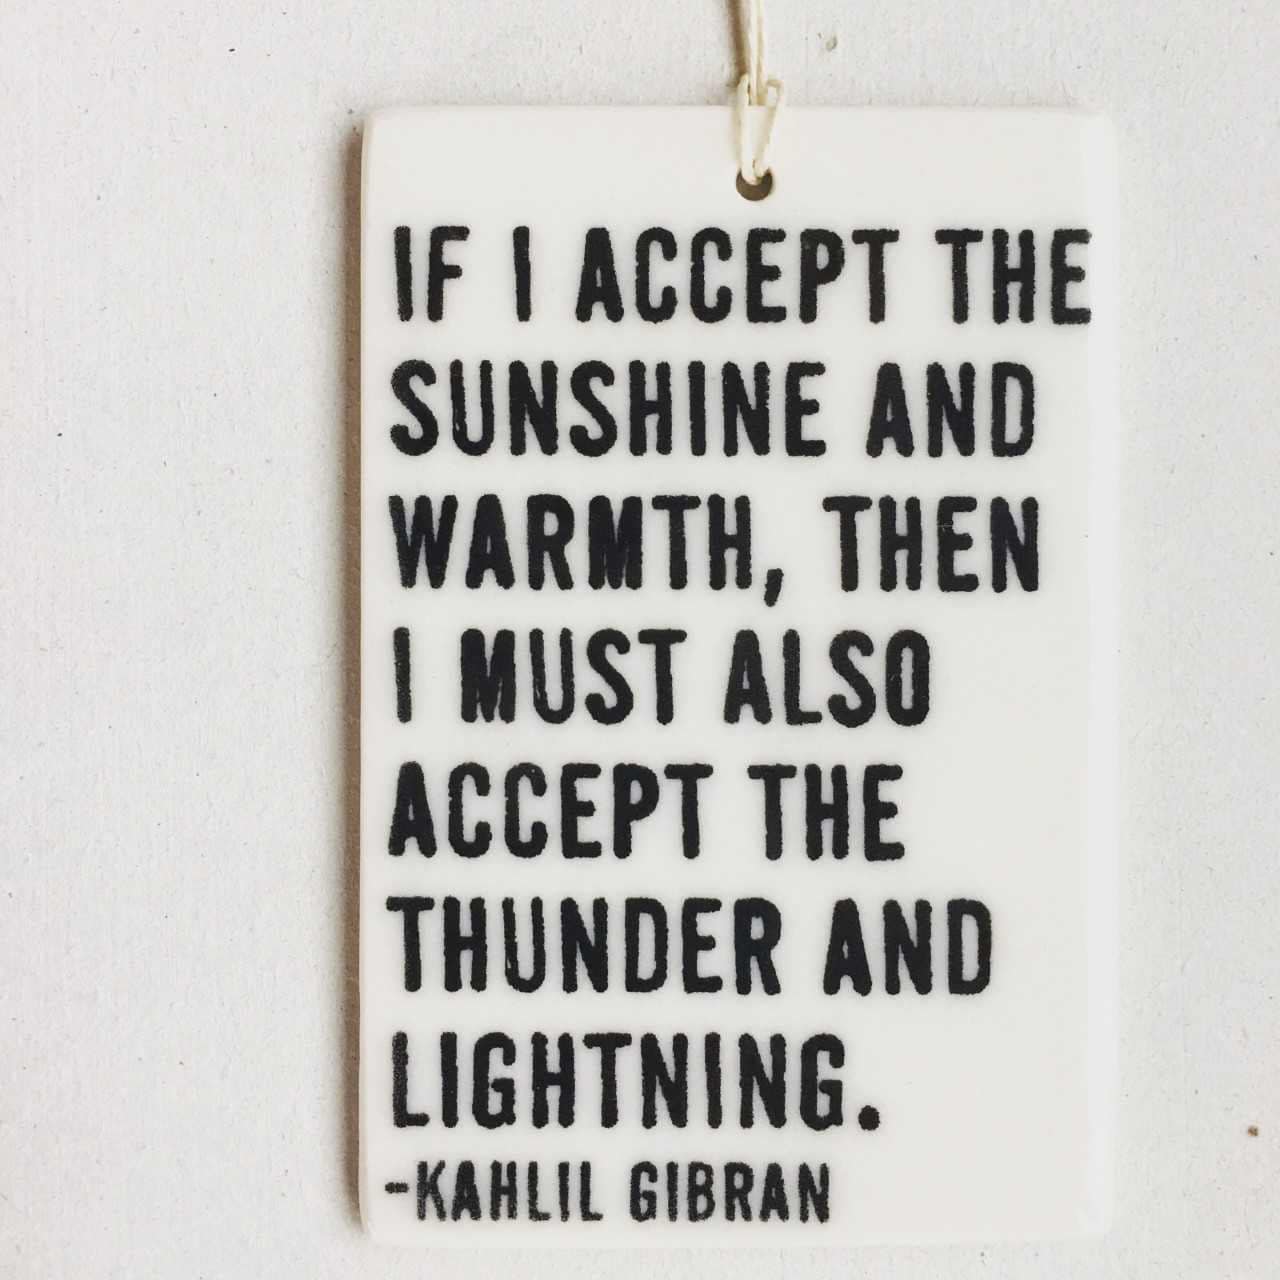 gibran quote | khalil gibran quote wall hanging | kahlil gibran quote | acceptance | ceramic wall tag | meaningful gift | the prophet